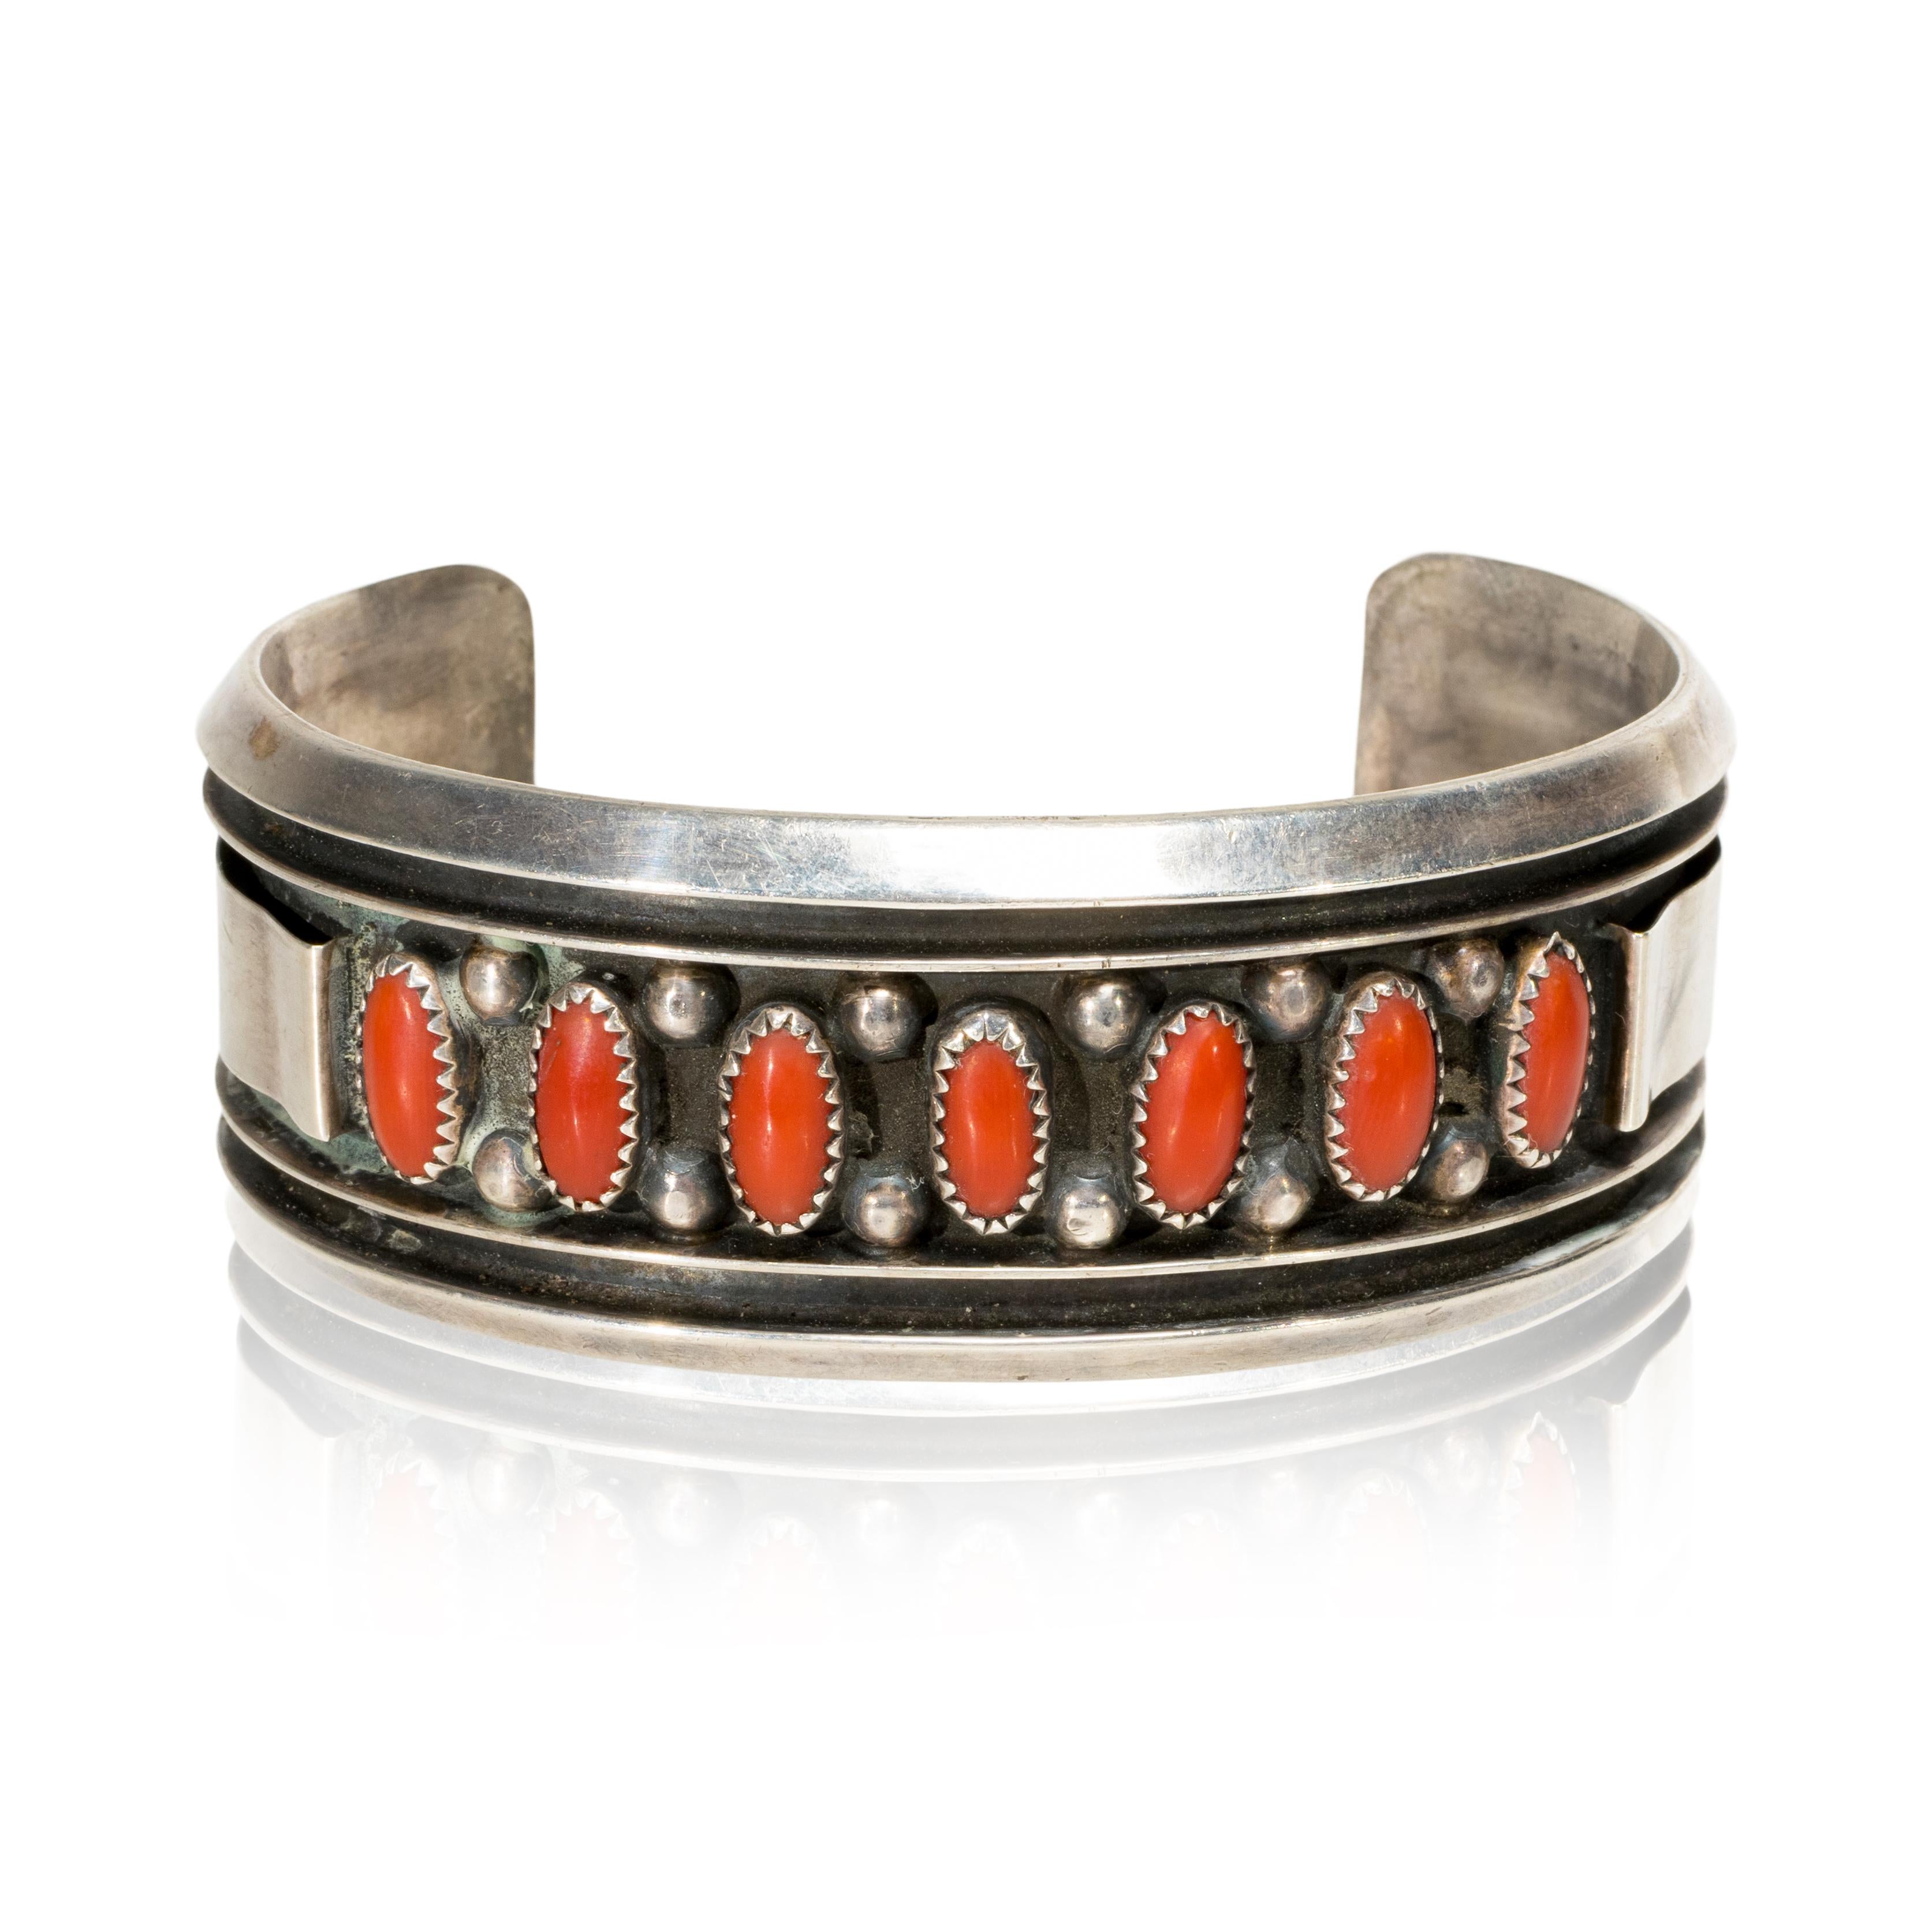 Navajo sterling and coral cuff bracelet. Signed J. S. Jackie Singer, Navajo. Seven recessed bezel set red coral cabochons with beaded accents in shadow box frame.

PERIOD: Late 20th Century
ORIGIN: Southwest - Navajo, Native American
SIZE: 5 1/2